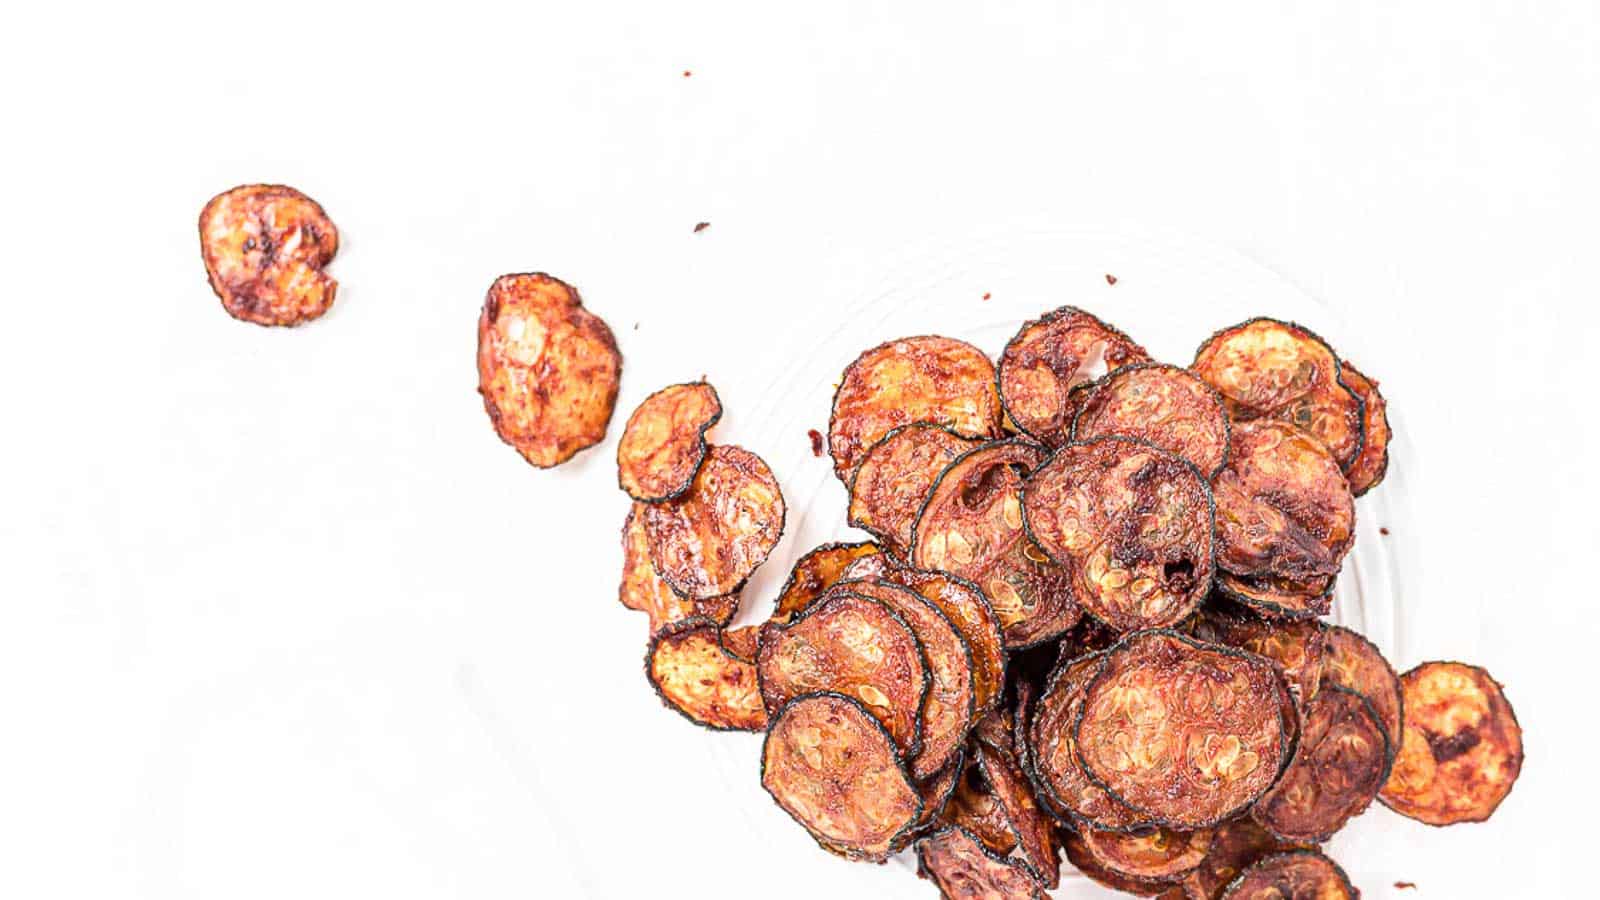 <p>Fall’s cozy vibes come alive with Smoked Paprika Zucchini Chips, offering a satisfying crunch and smoky flavor. Enjoy as a standalone snack or with your favorite dip at gatherings.<br><strong>Get the Recipe: </strong><a href="https://www.lowcarb-nocarb.com/smoked-paprika-zucchini-chips/?utm_source=msn&utm_medium=page&utm_campaign=Your%20title%20here:%20it%20should%20be%2055-60%20characters,%20ideally">Smoked Paprika Zucchini Chips</a></p>